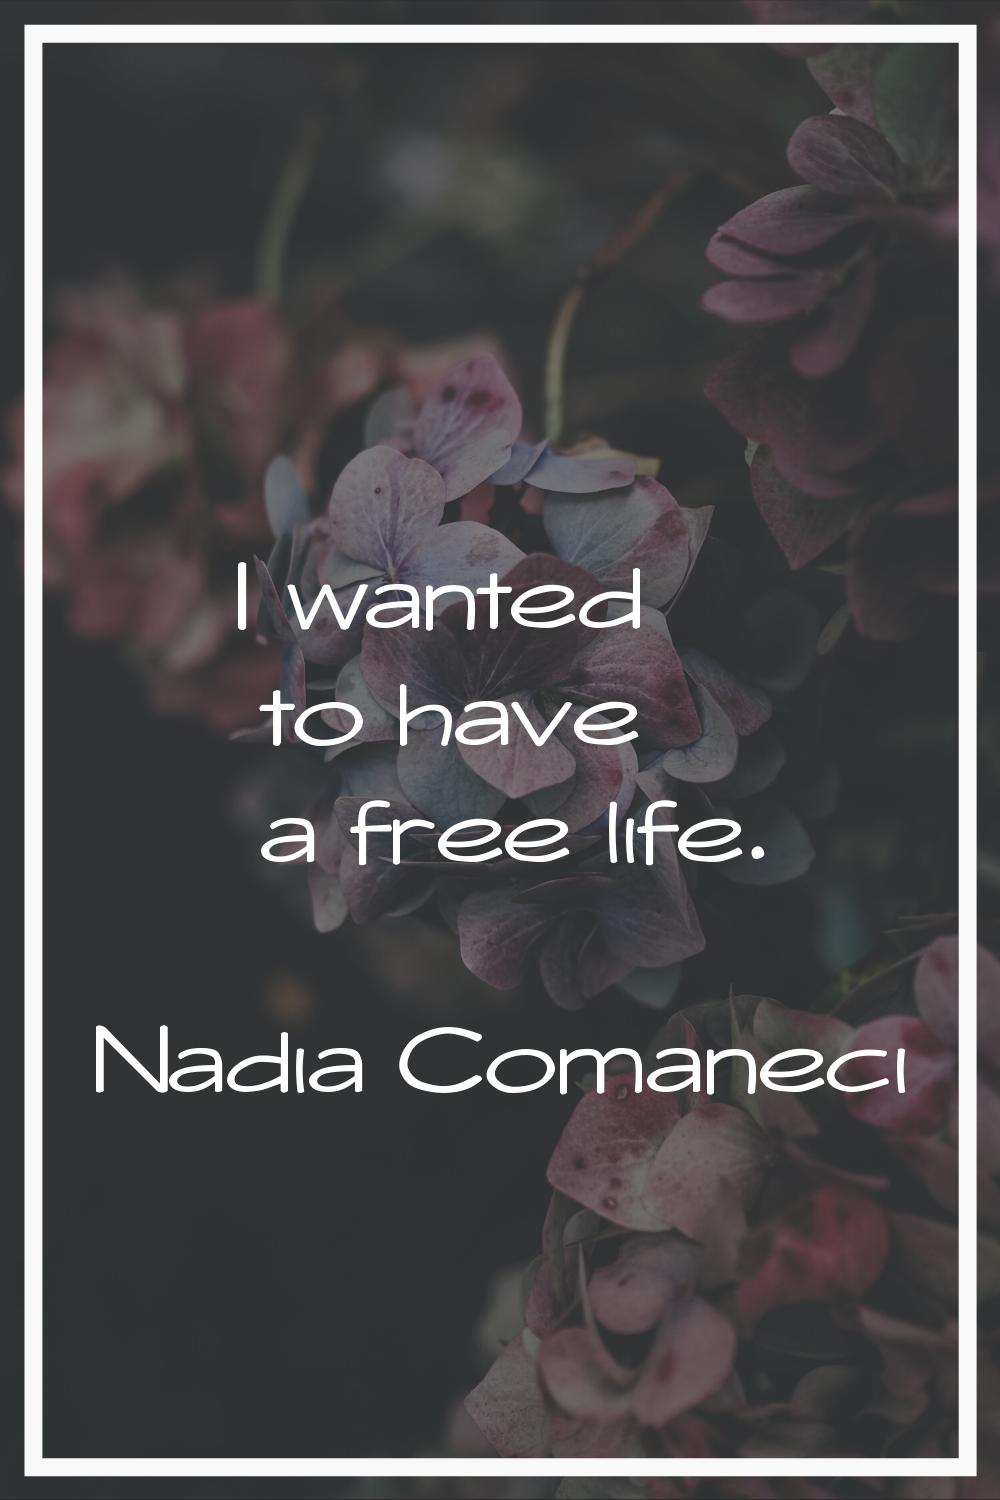 I wanted to have a free life.